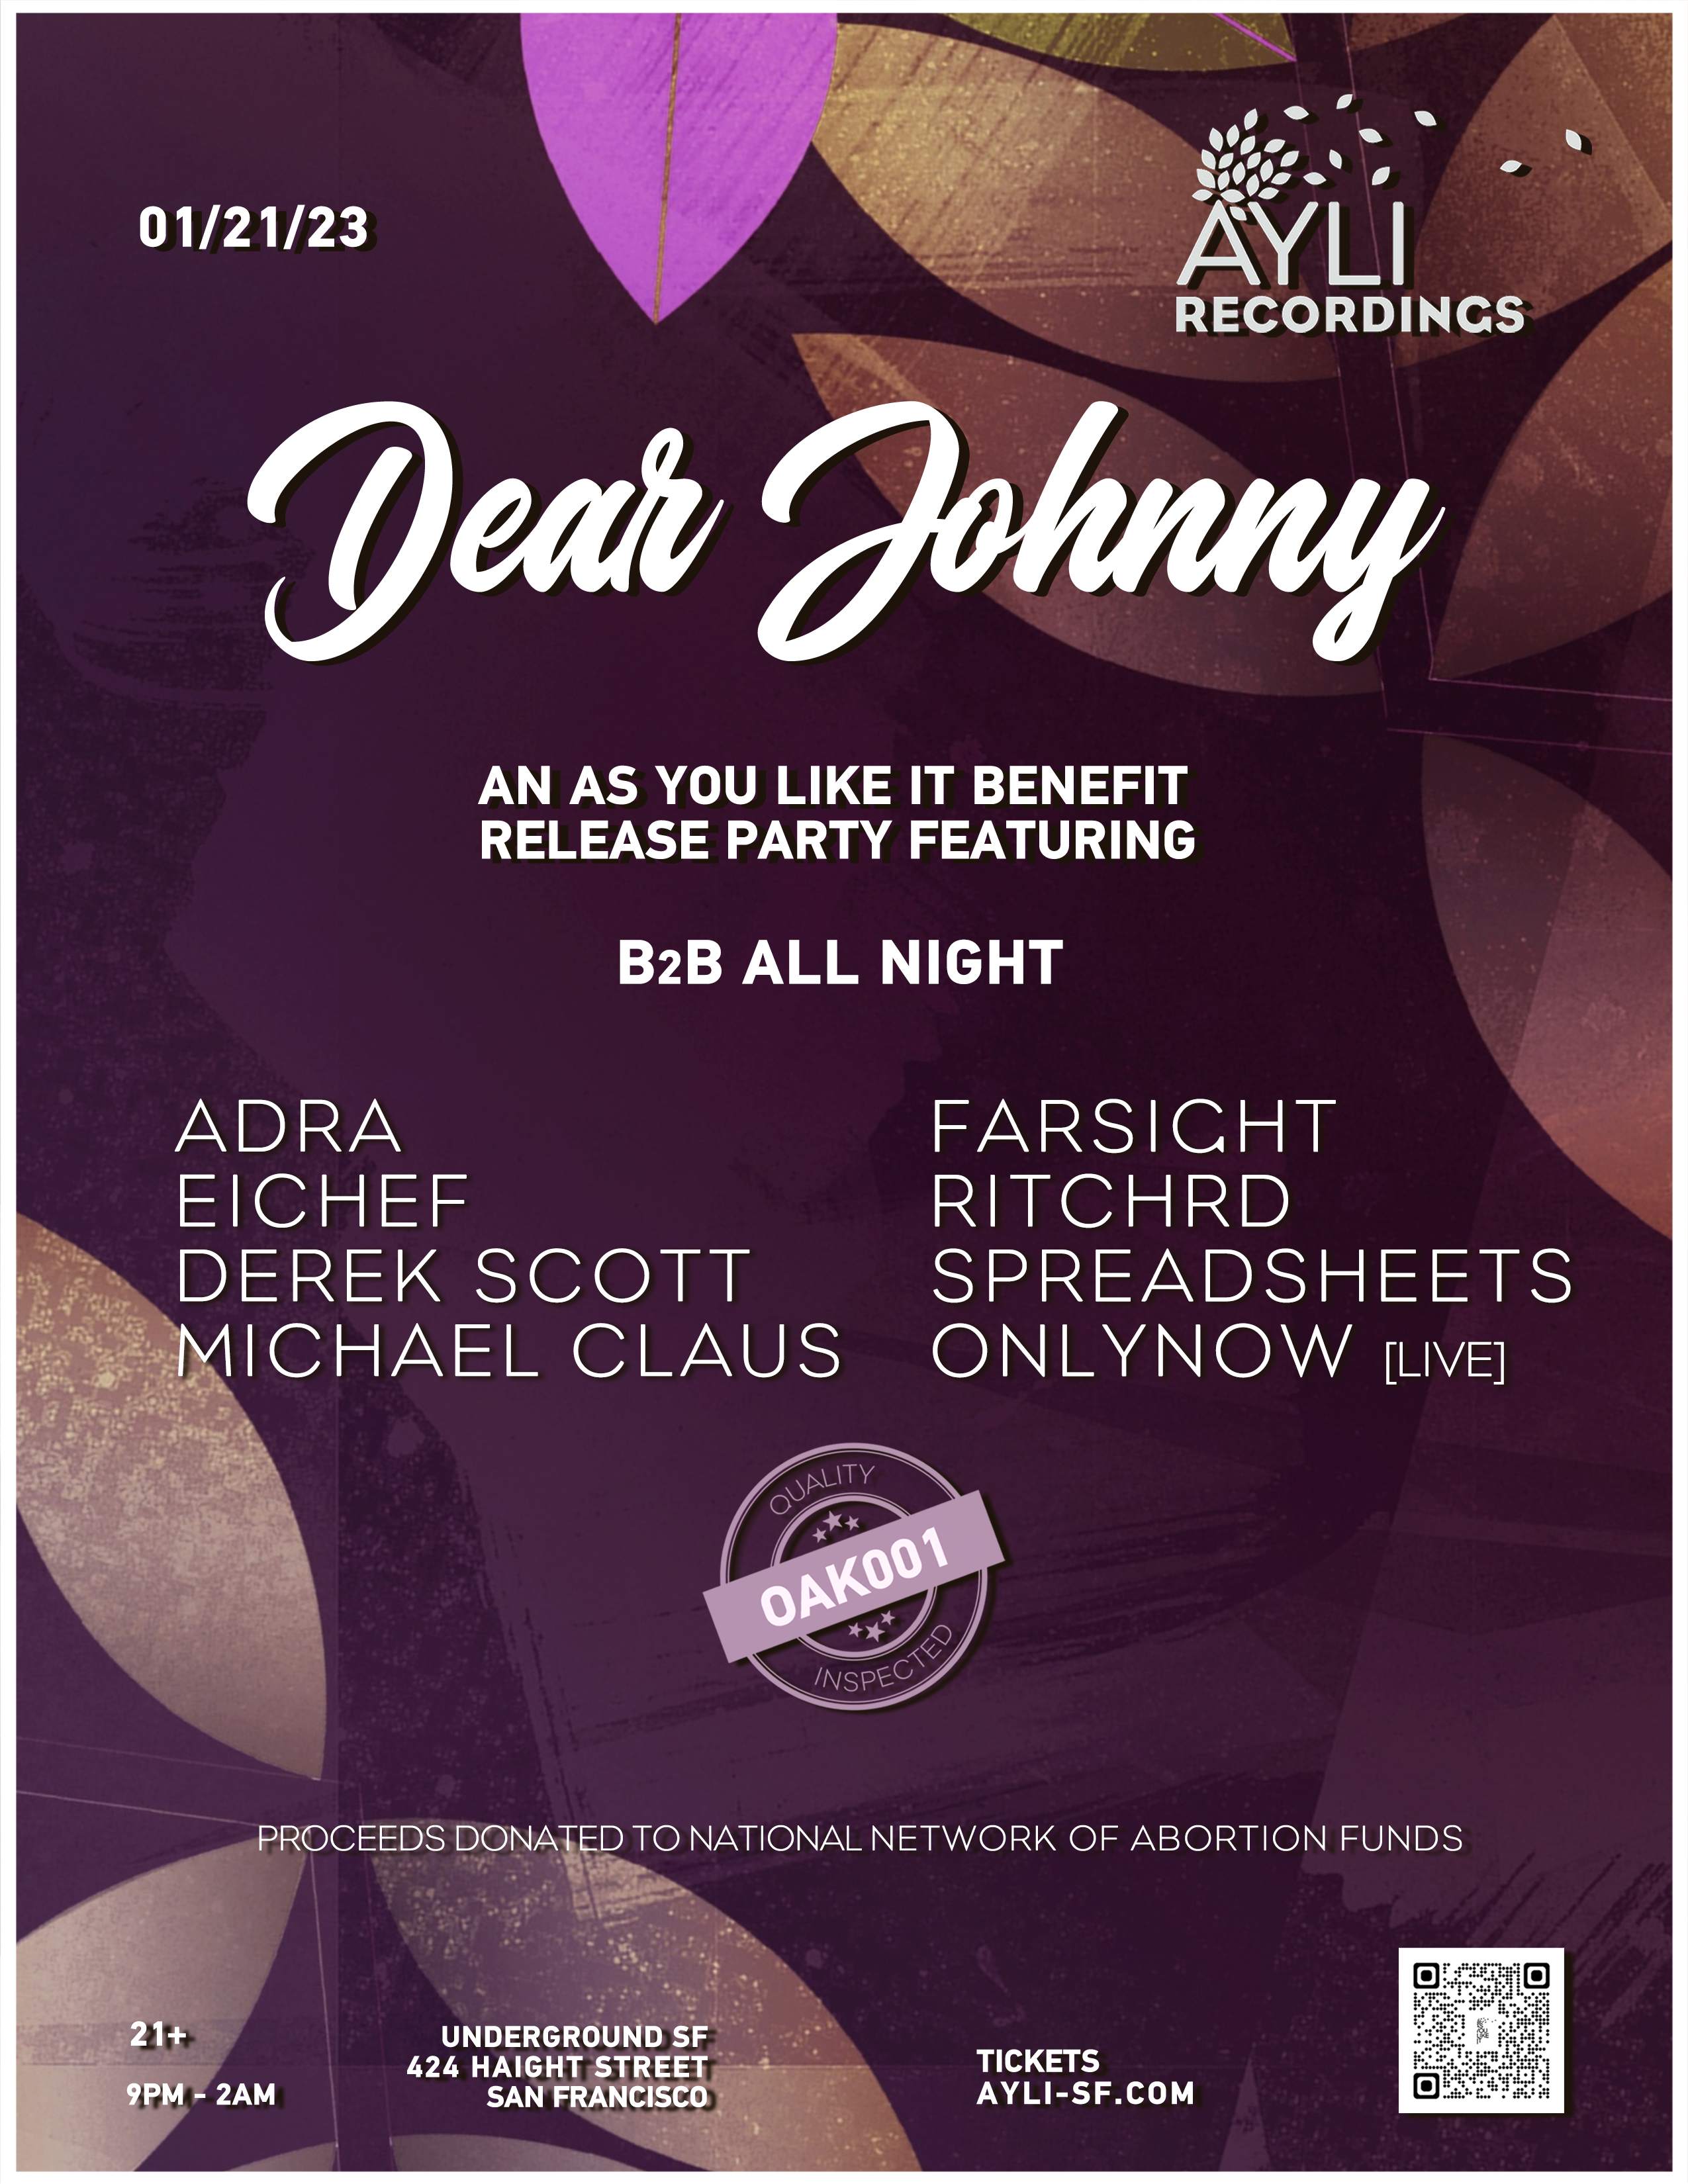 AYLI Recordings presents 'Dear Johnny' Release Party - フライヤー表